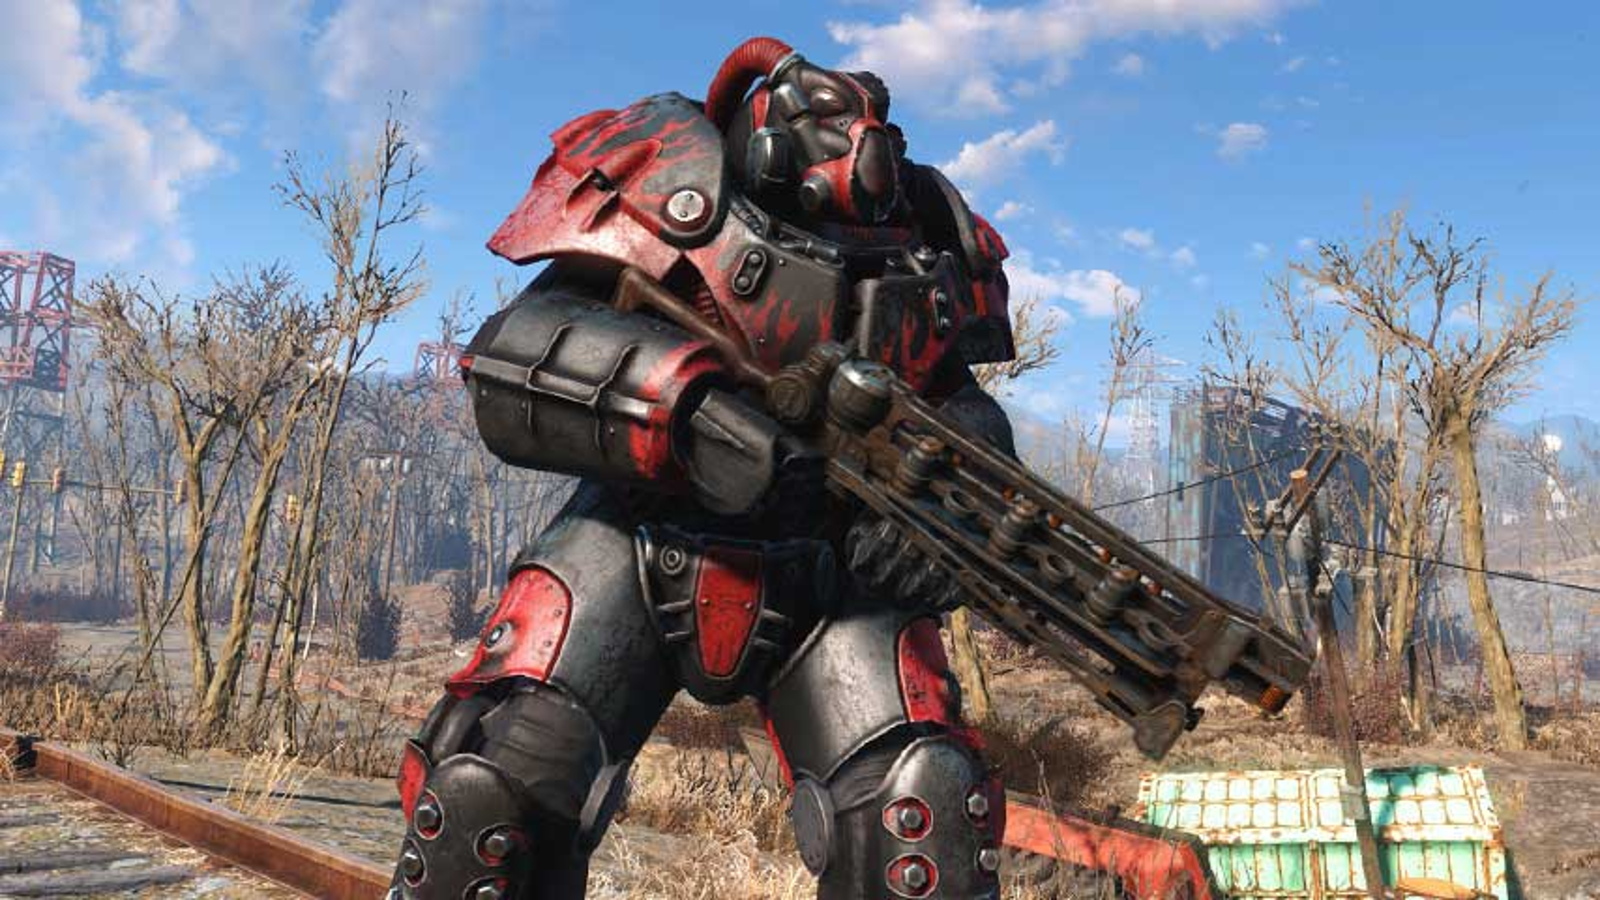 Send your companions home with delightful Fallout 4 mod